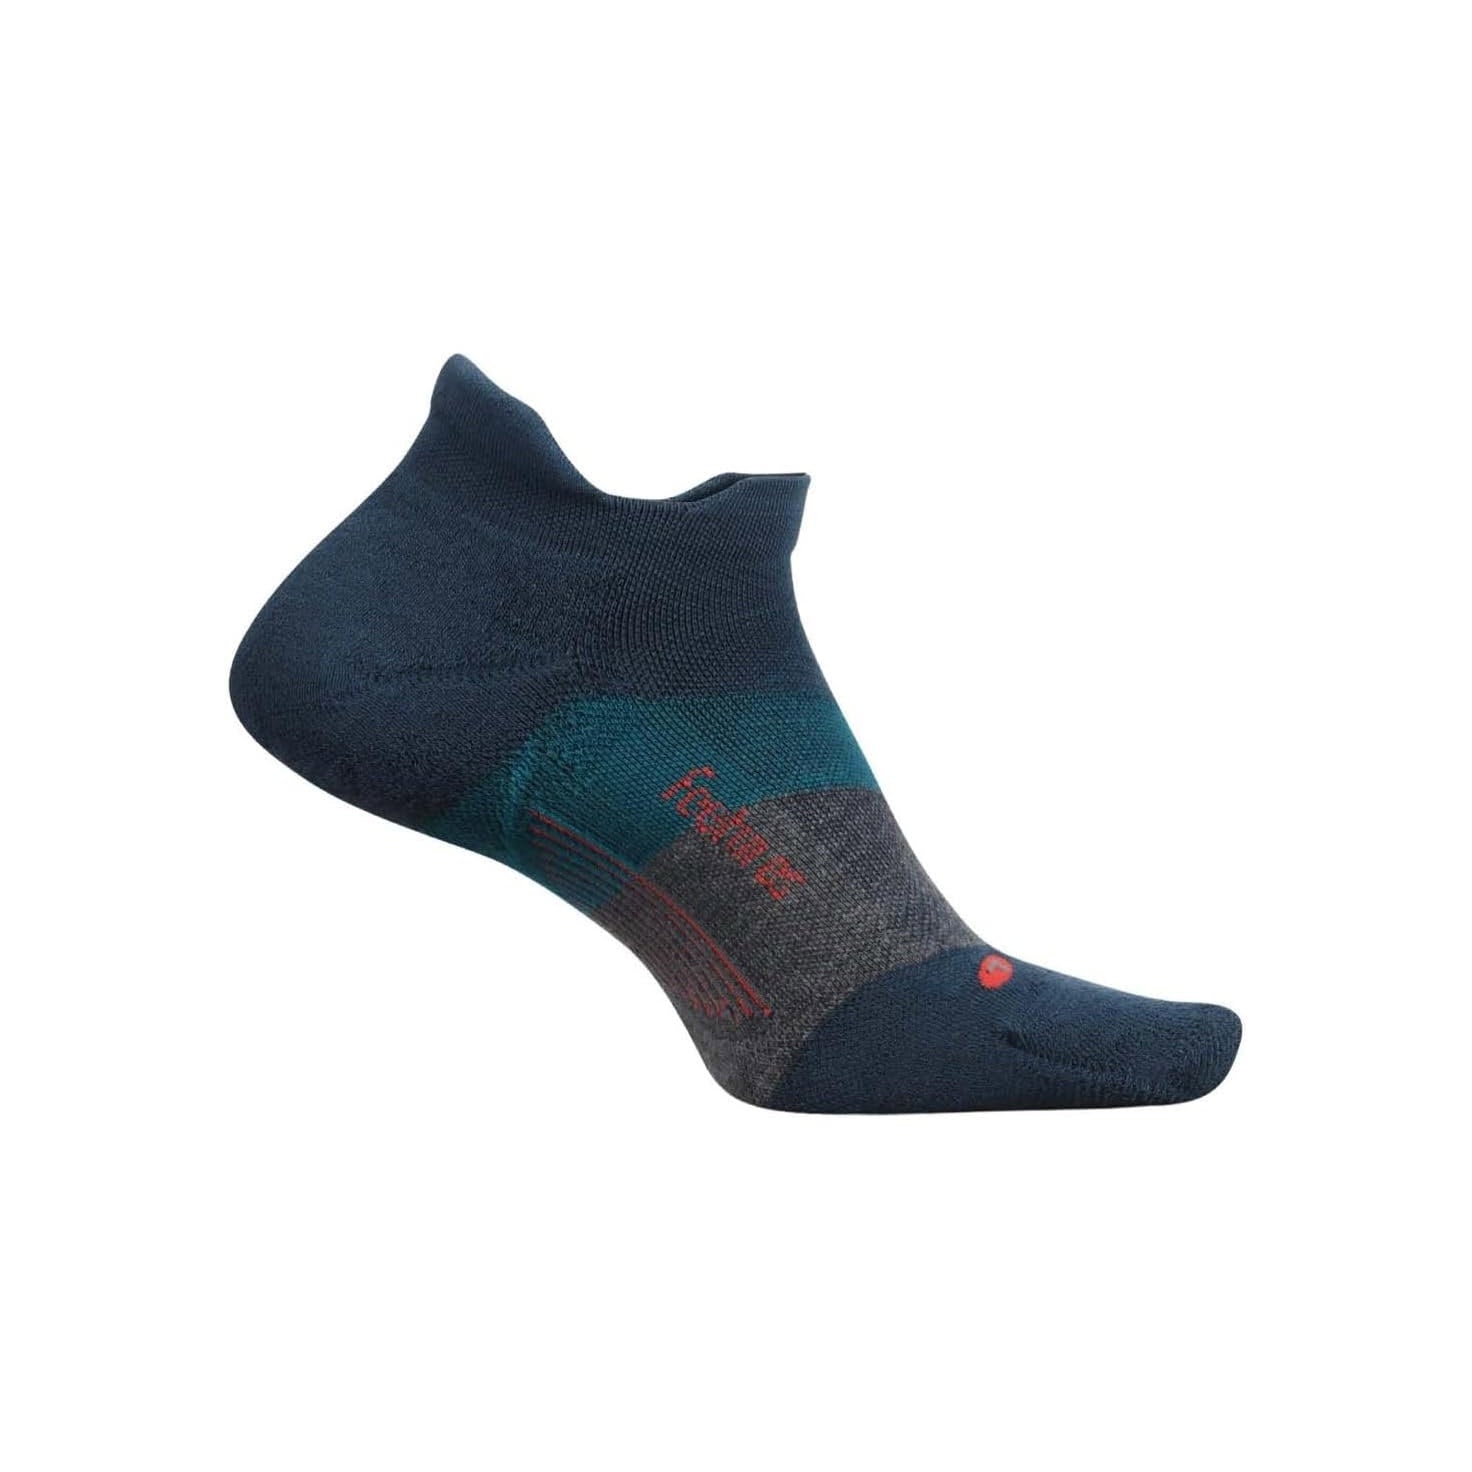 A single ankle-length sock from Feetures with dark blue tones, teal accents, and red detailing on a white background, featuring targeted compression.